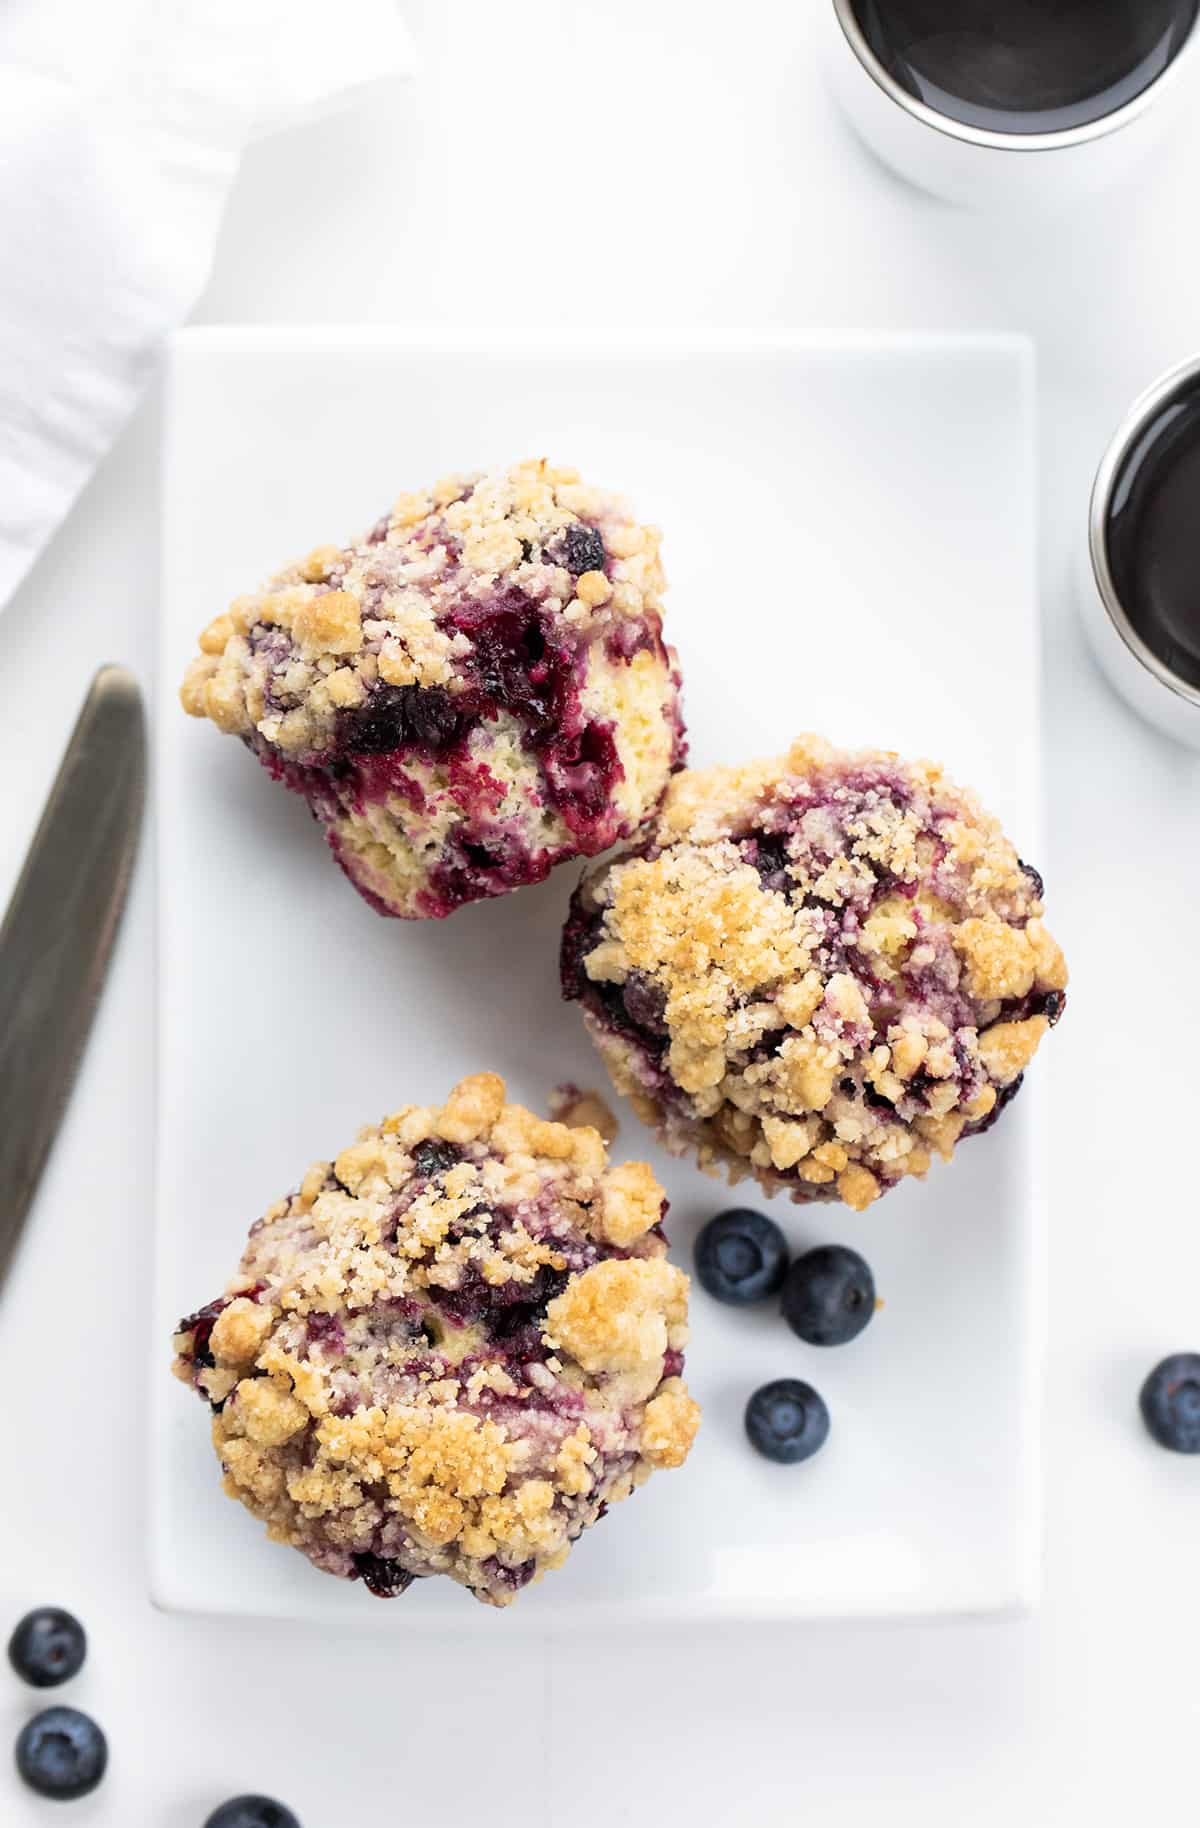 Blueberry Muffins on a White Plate with Blueberries around them.